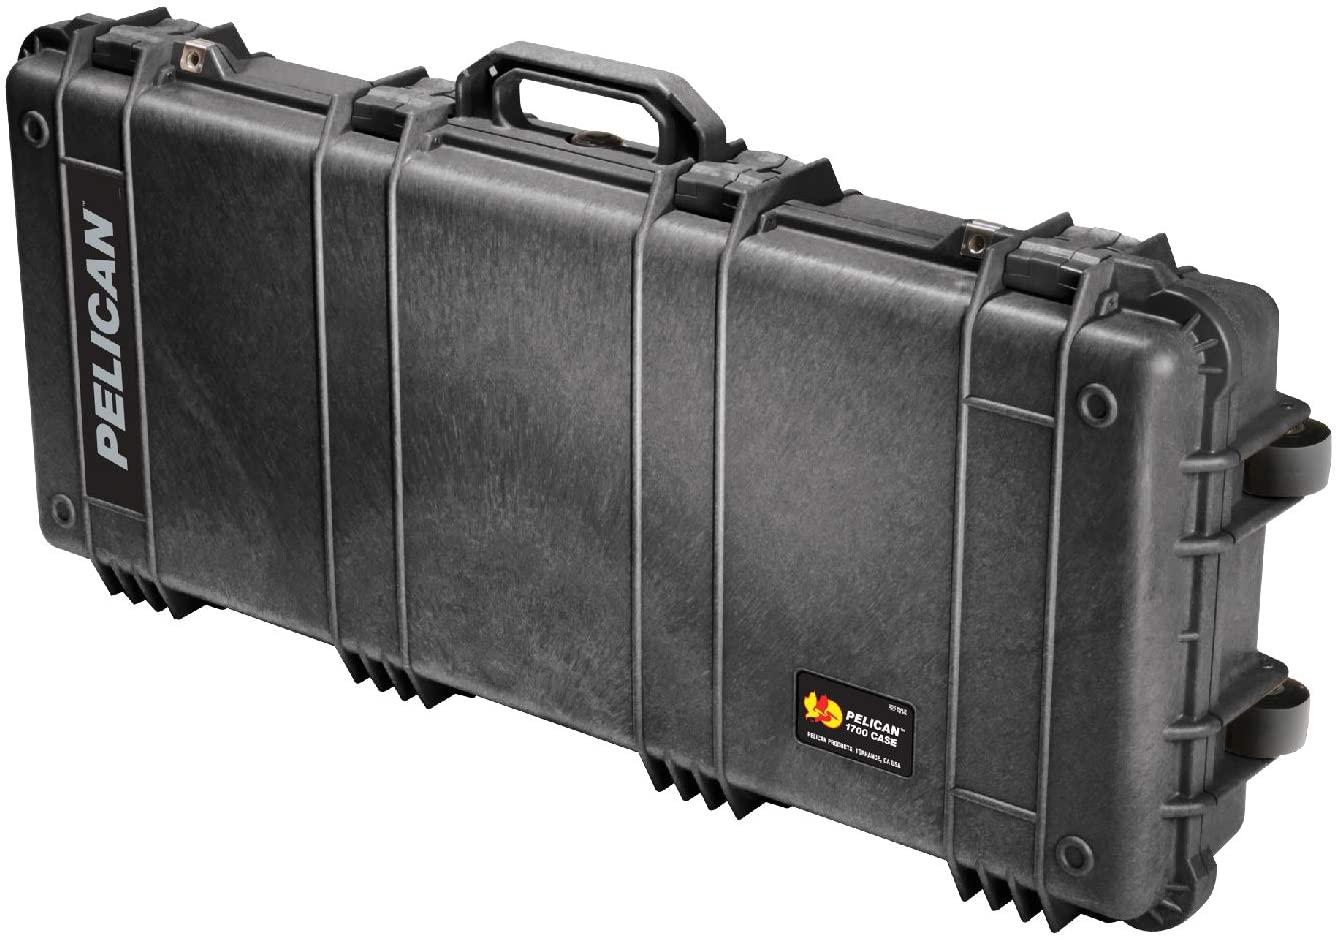 Pelican Protector 1700 Series Waterproof Hard Case for $184.46 Shipped